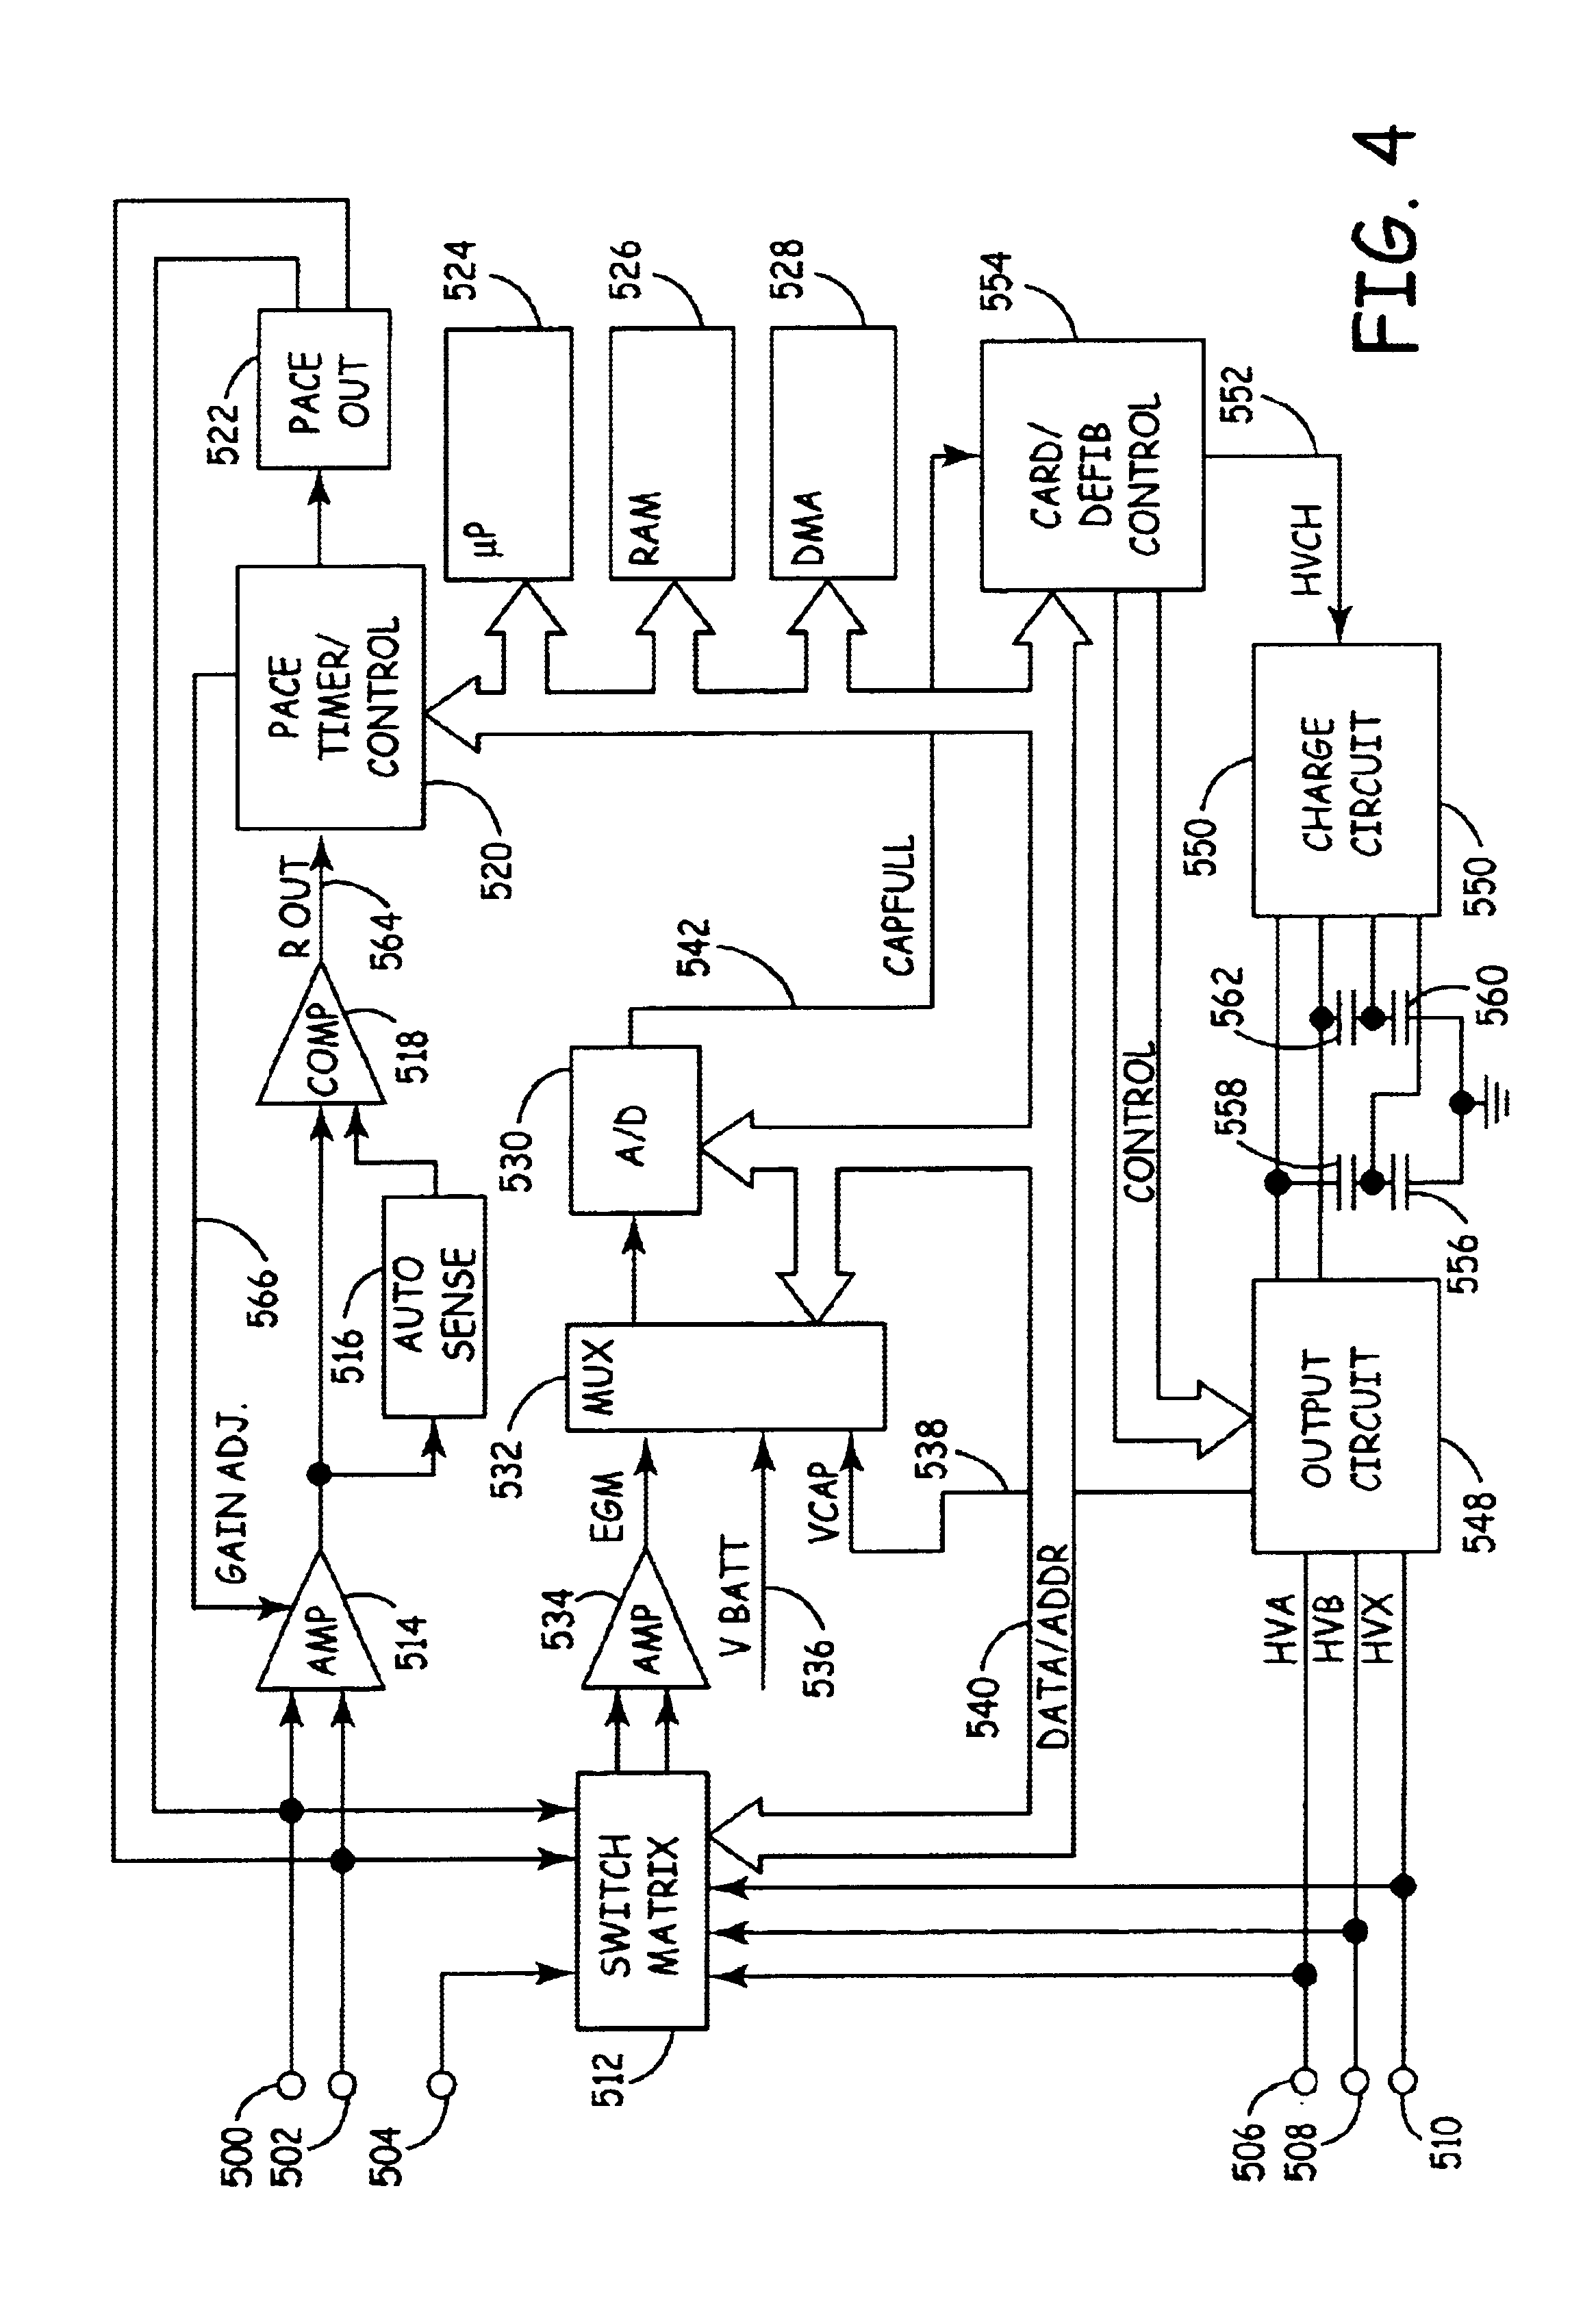 Method and apparatus for detection and treatment of tachycardia and fibrillation